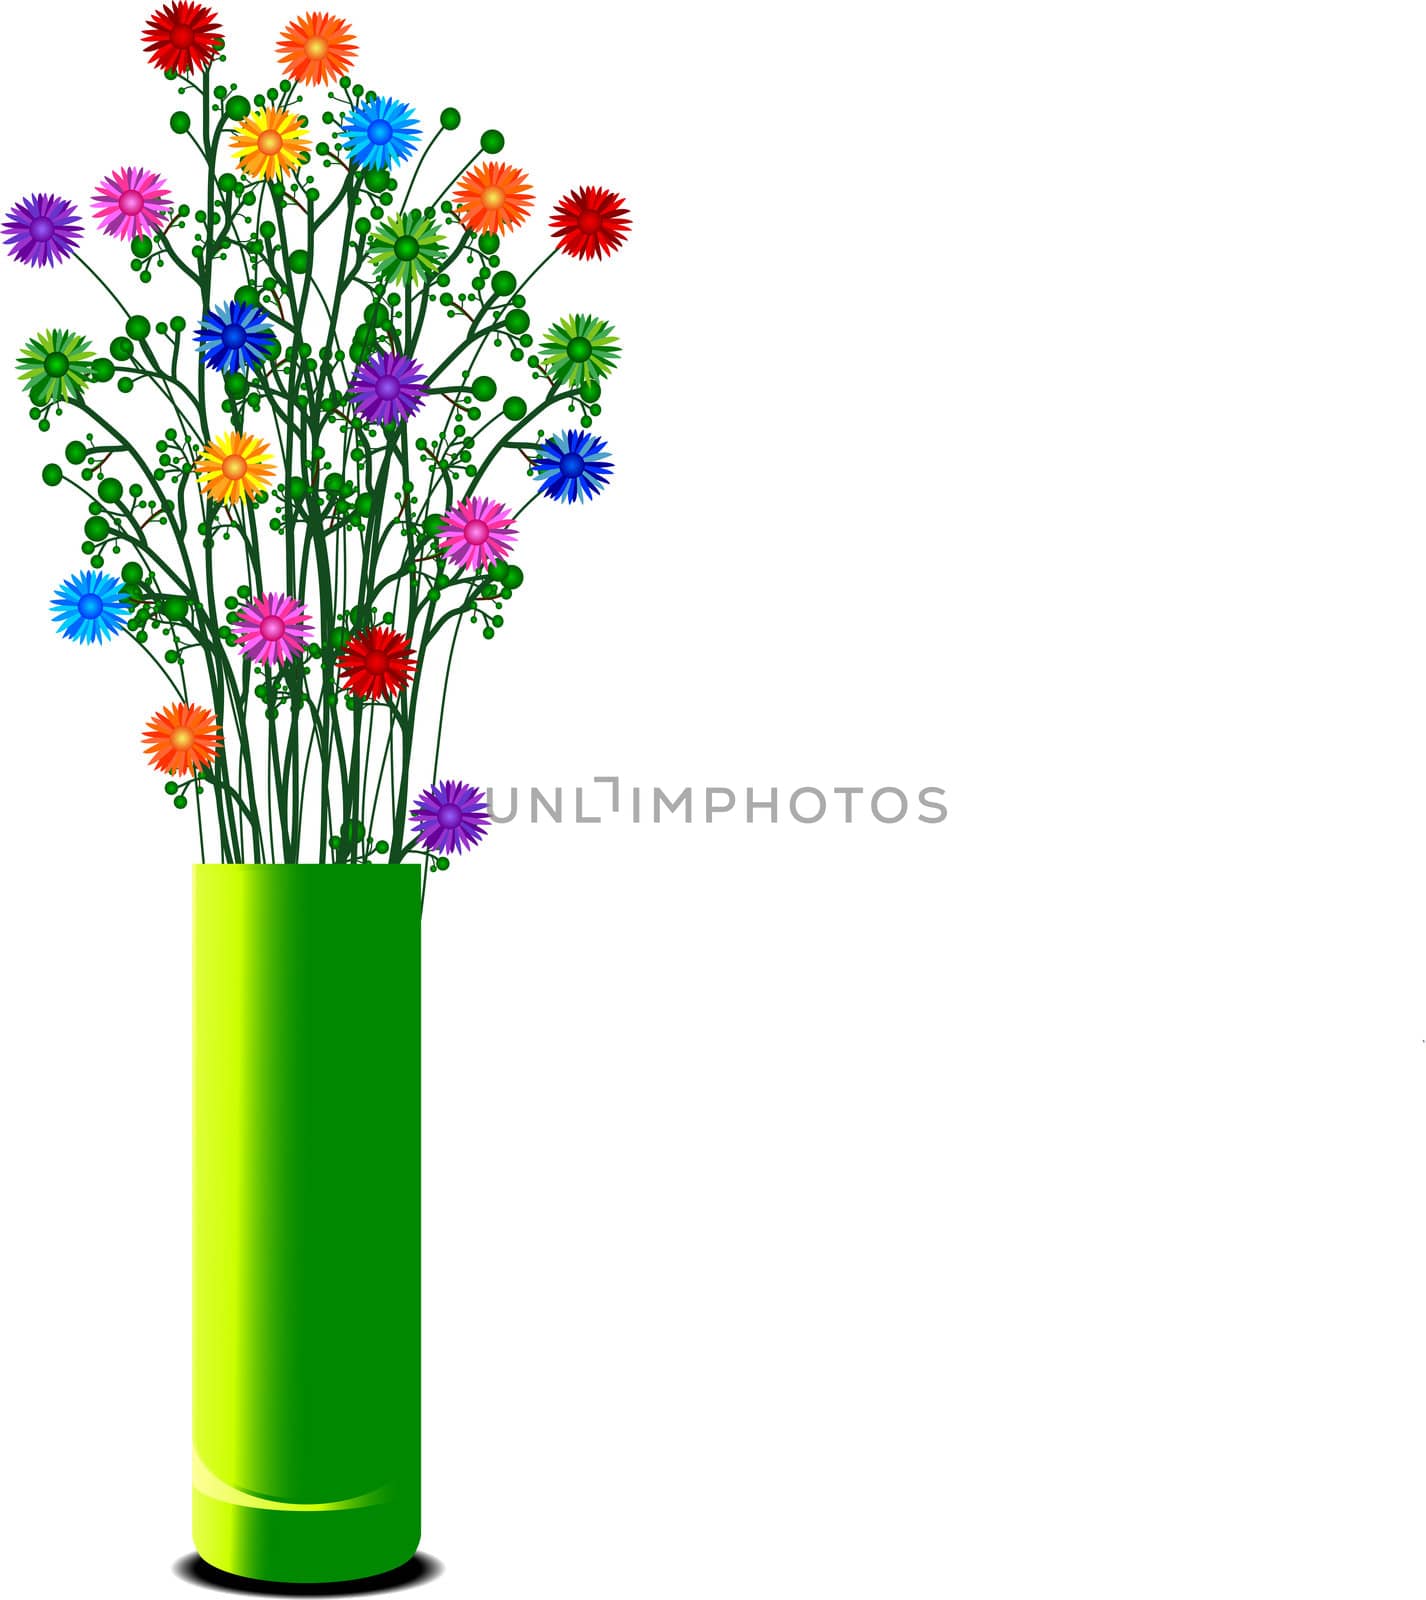 vase with colorful flowers